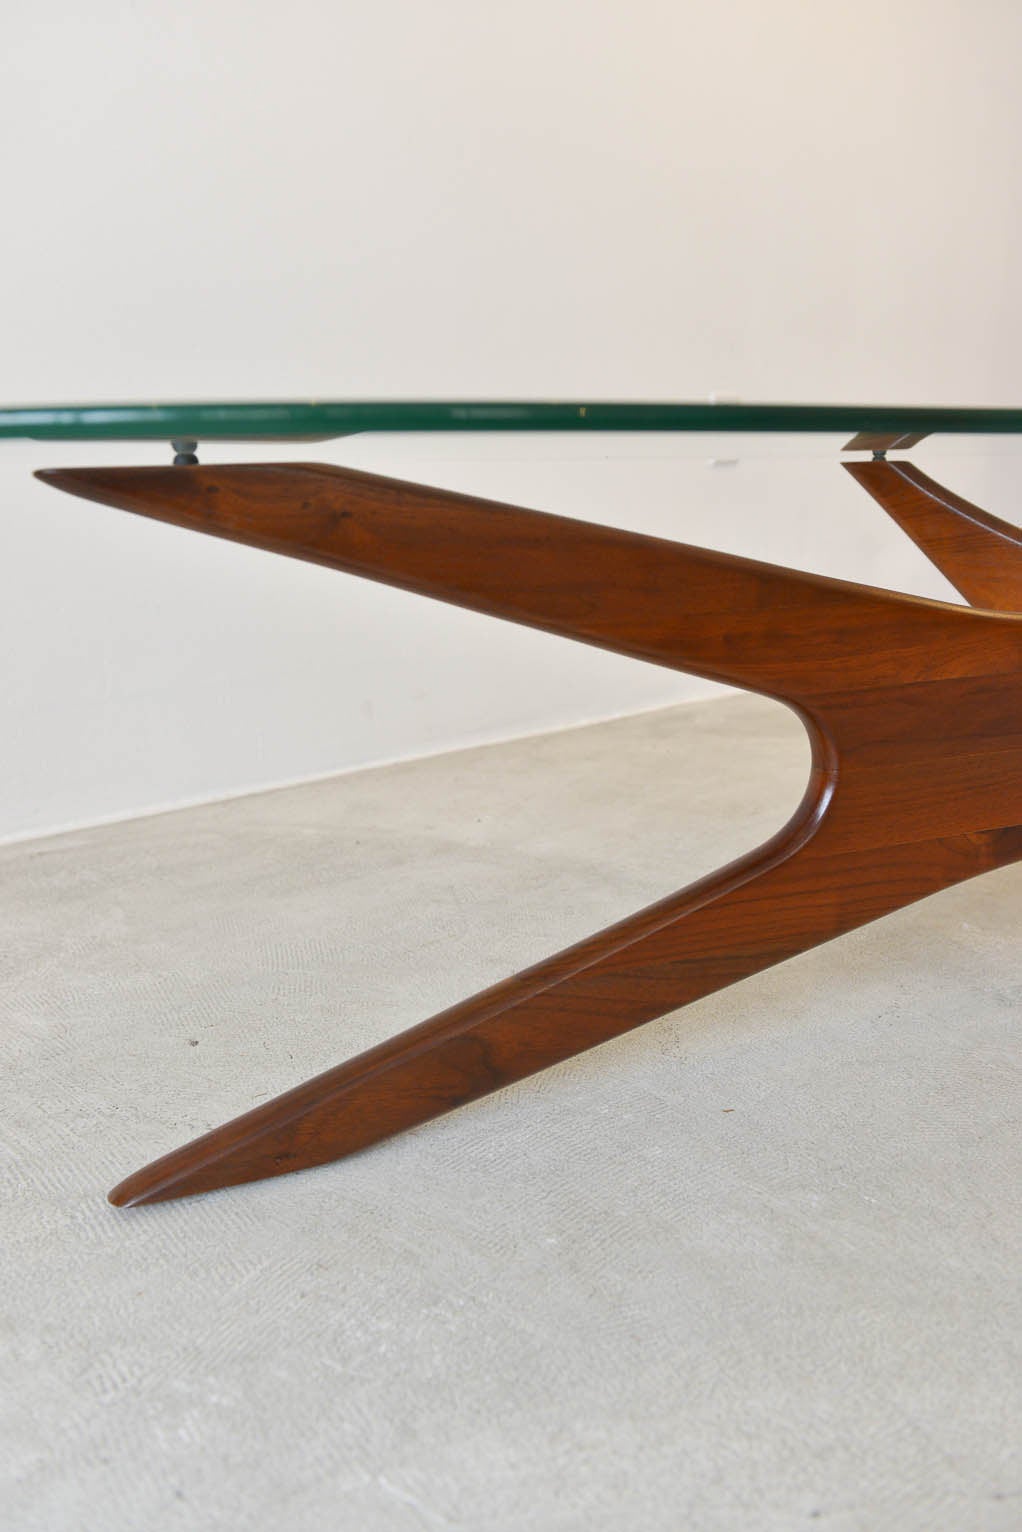 This beautiful original Adrian Pearsall sculptural walnut coffee table has the original kidney shaped glass with fully restored walnut base. Beautiful abstract lines, this piece is a classic Pearsall design.

The original glass is in excellent